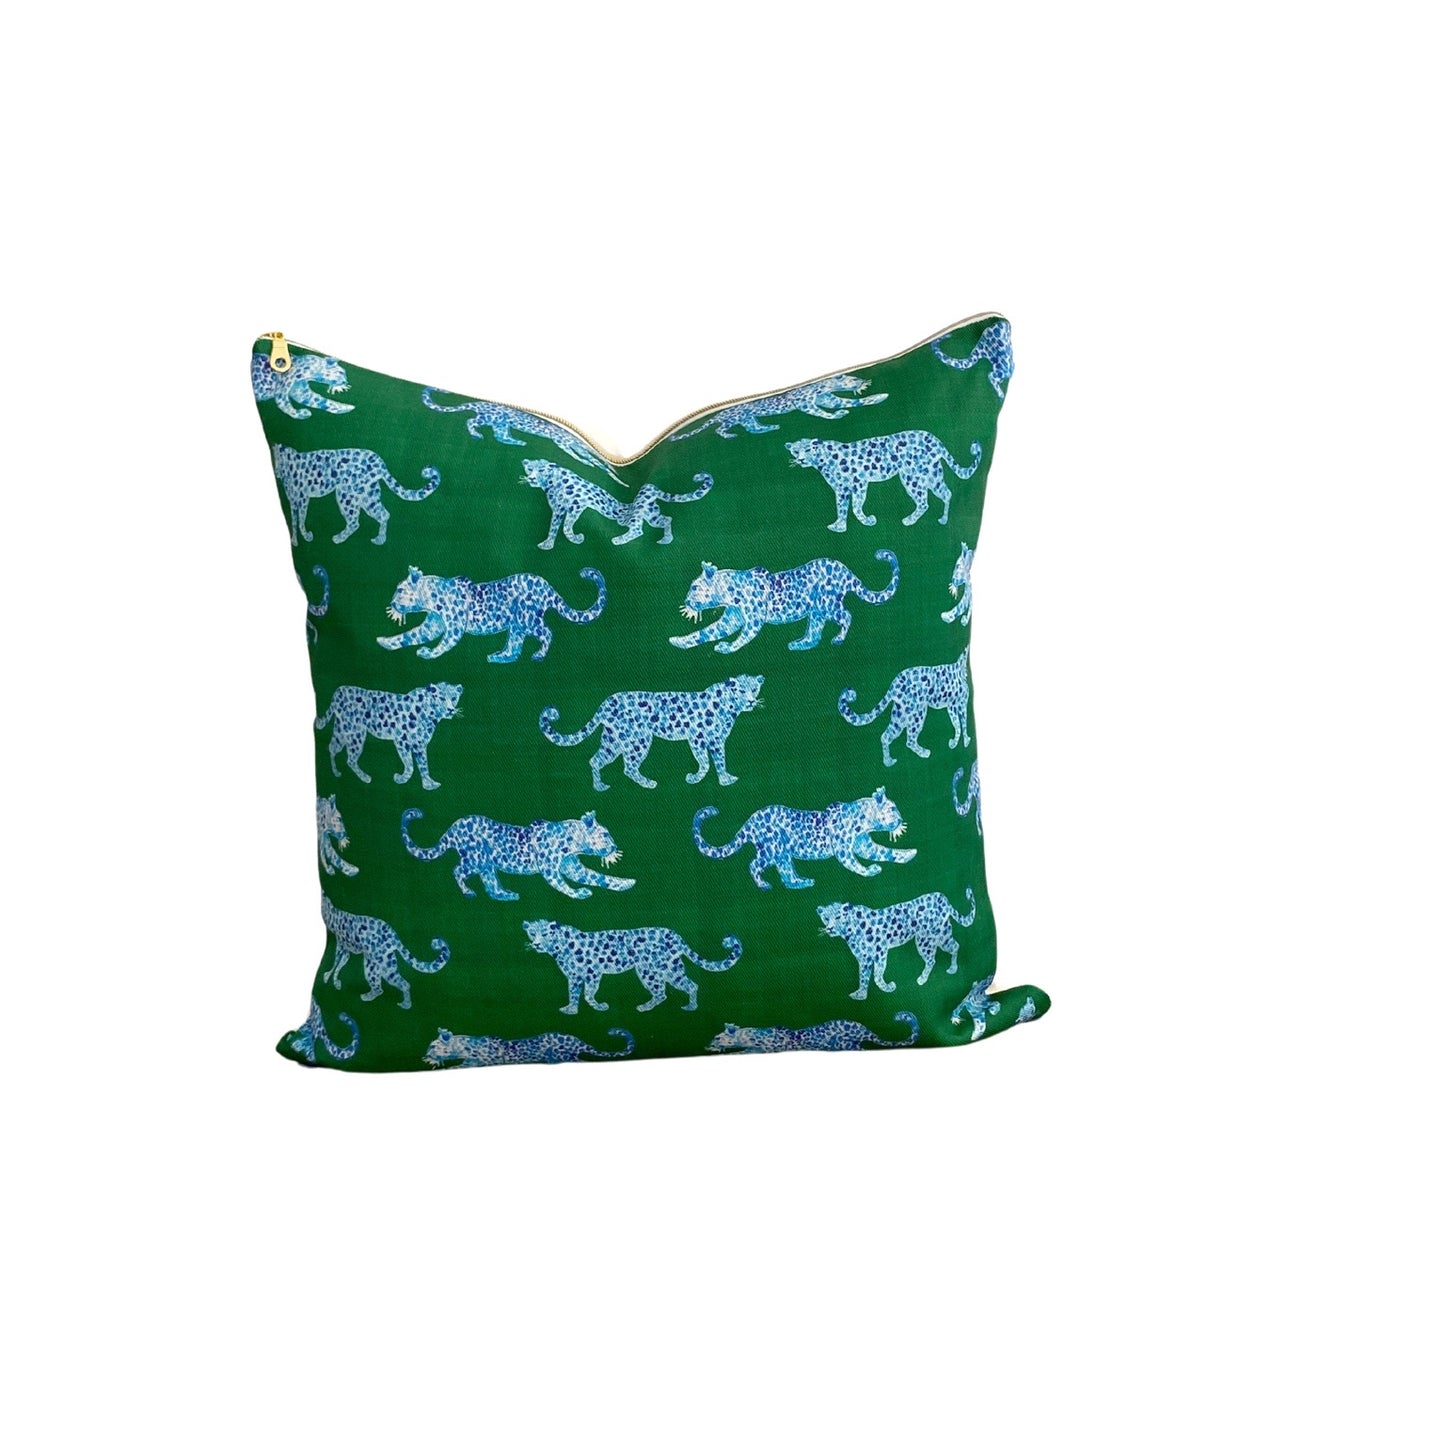 Blue and Green Leopard Pillow Cover- Designed by Danika Herrick